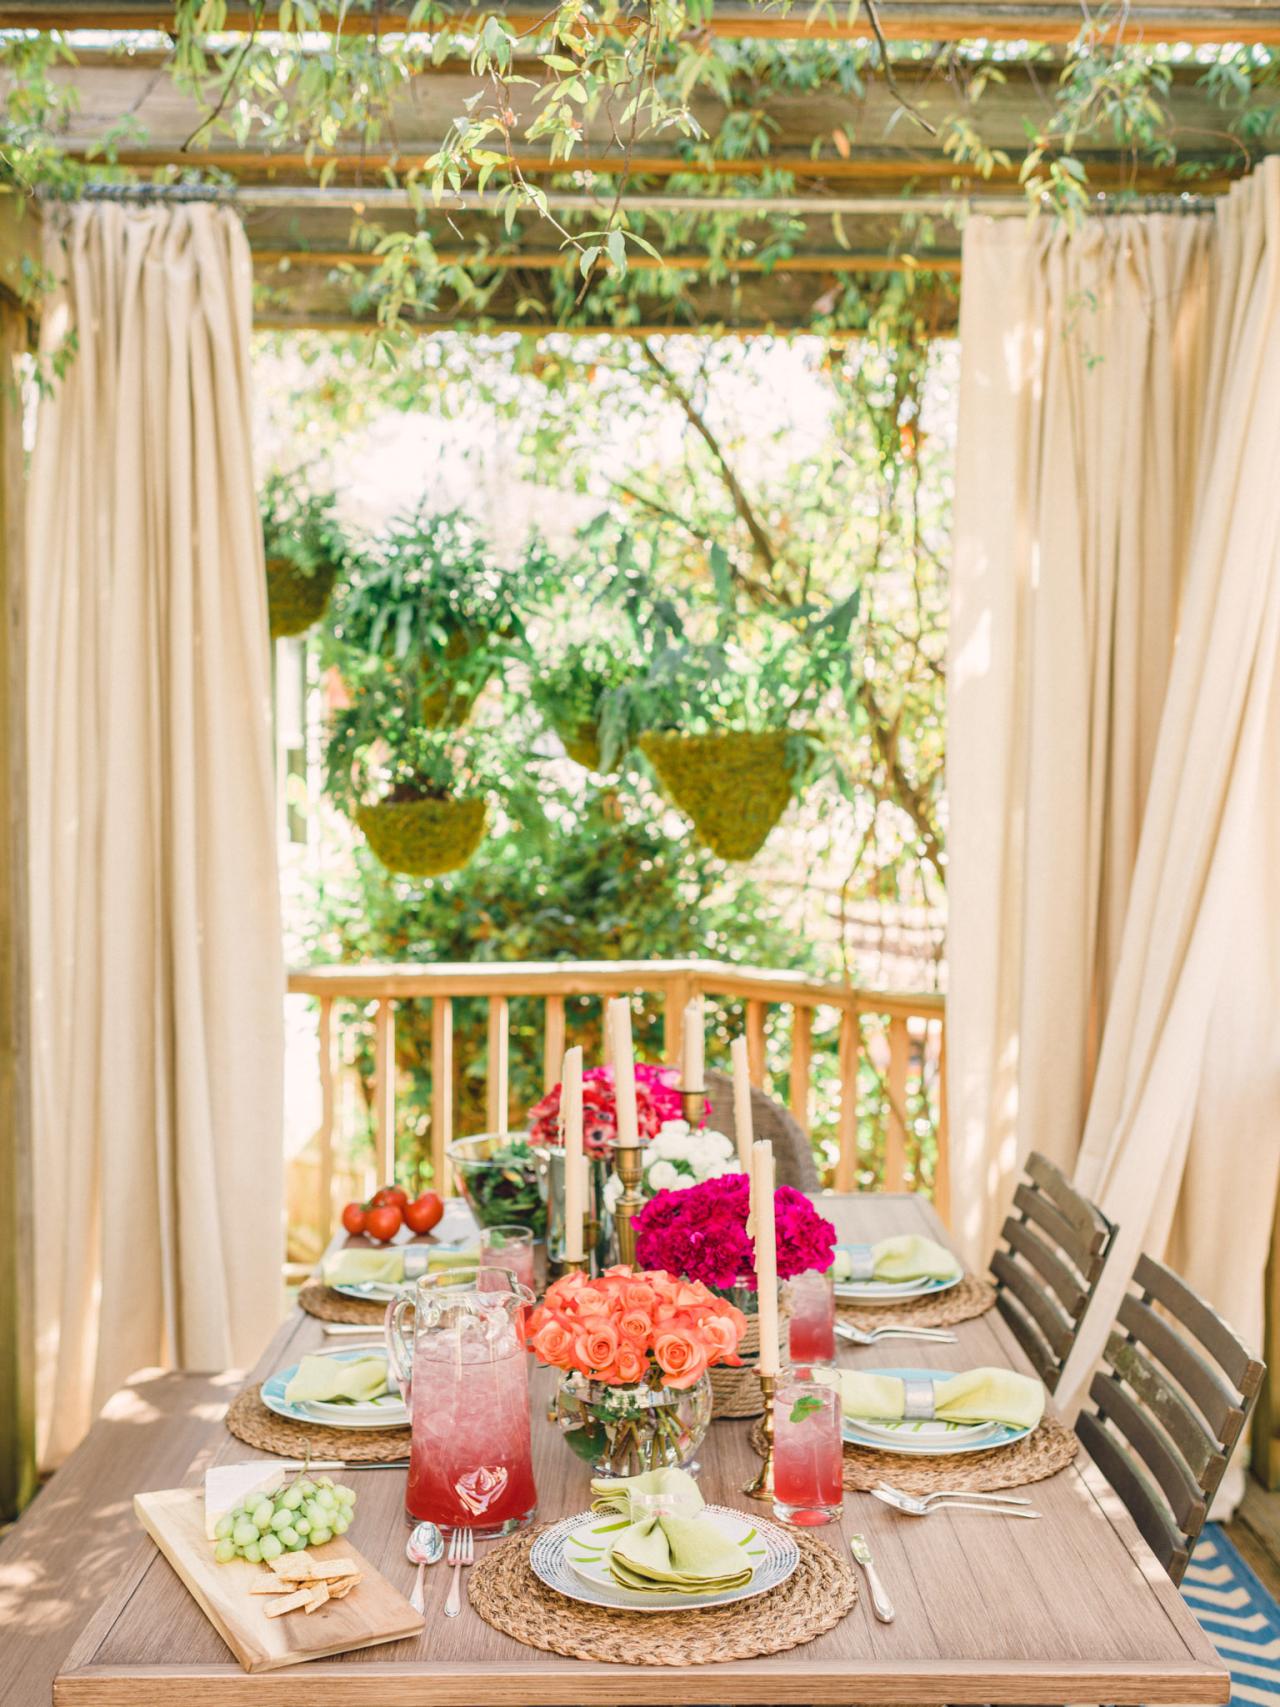 40 Chic Porches and Patios Ideas on a Budget